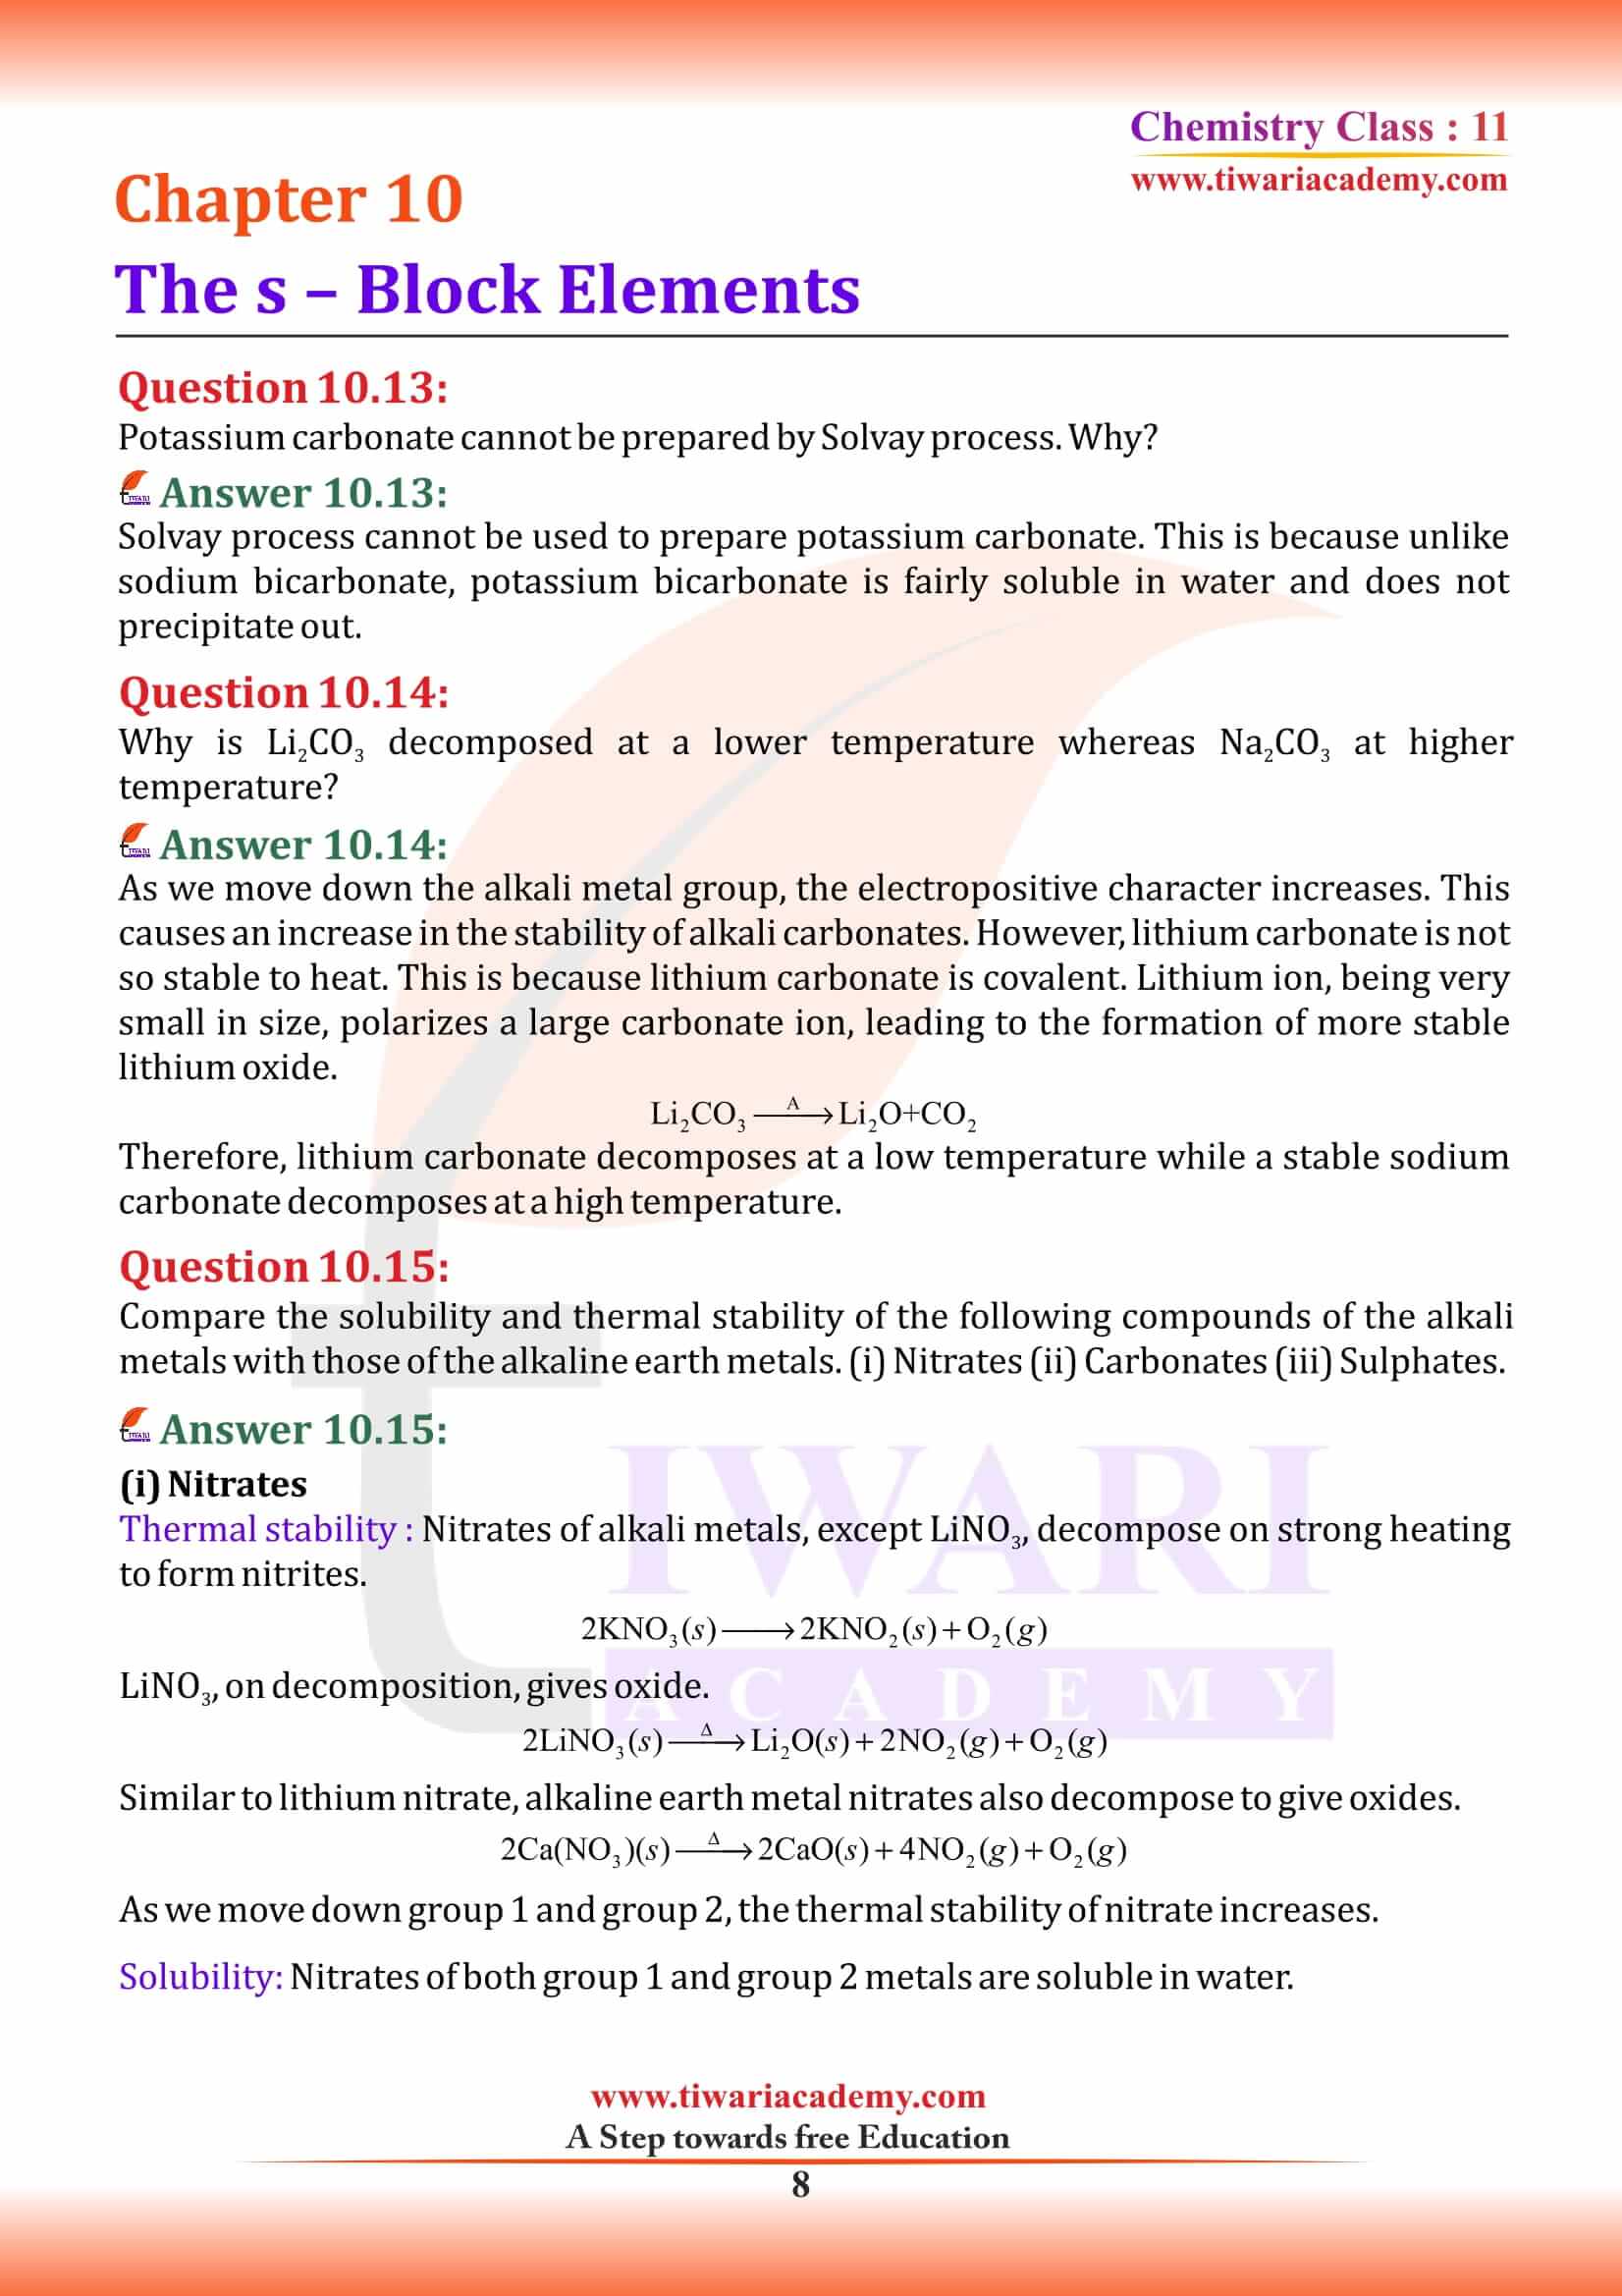 NCERT Solutions for Class 11 Chemistry Chapter 10 intext questions